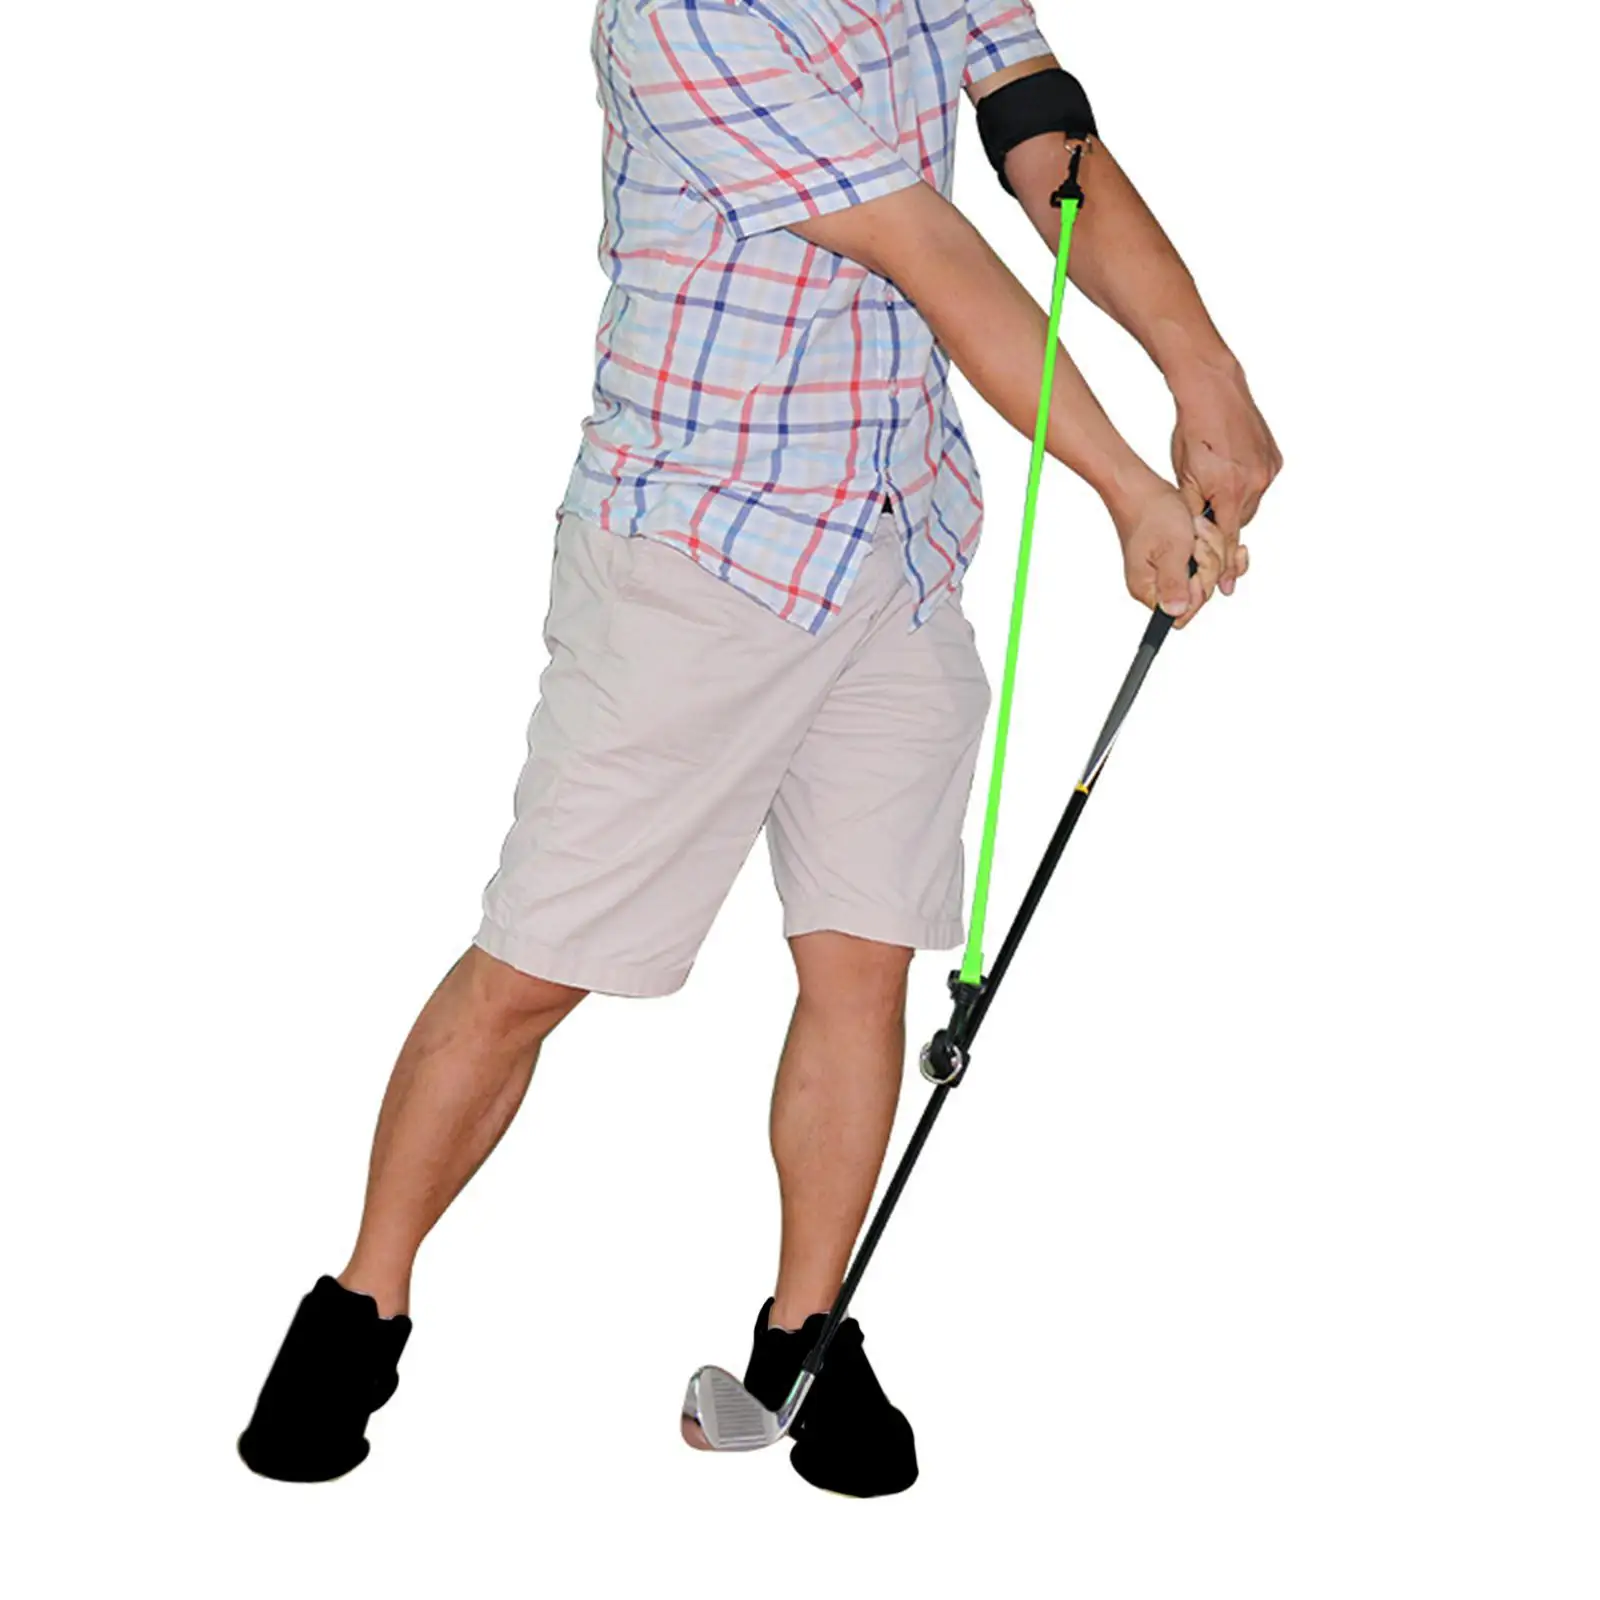 Golf Swing Trainer Gesture Alignment Training Durable for Fitness Supplies